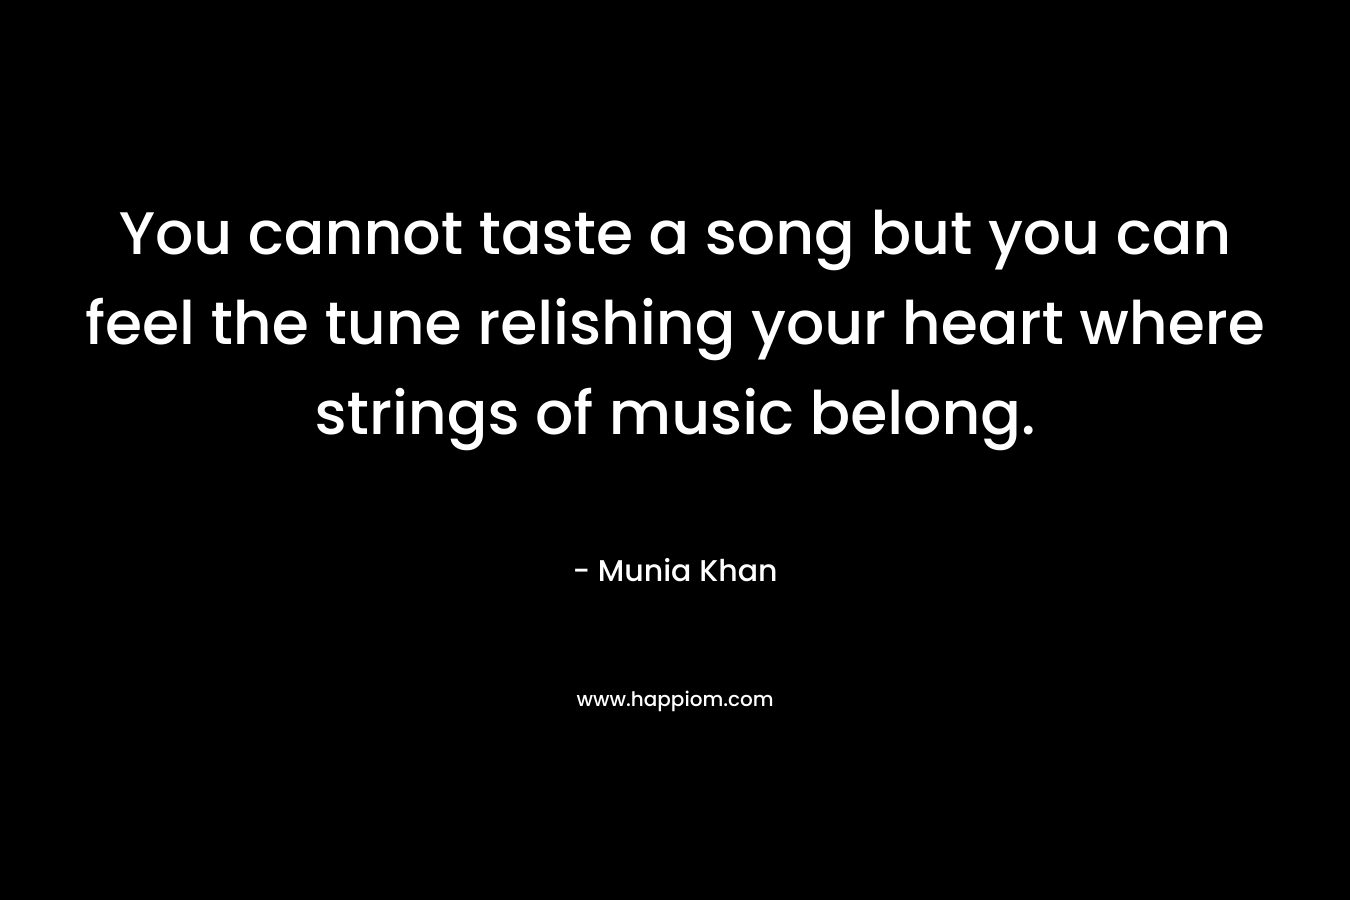 You cannot taste a song but you can feel the tune relishing your heart where strings of music belong.